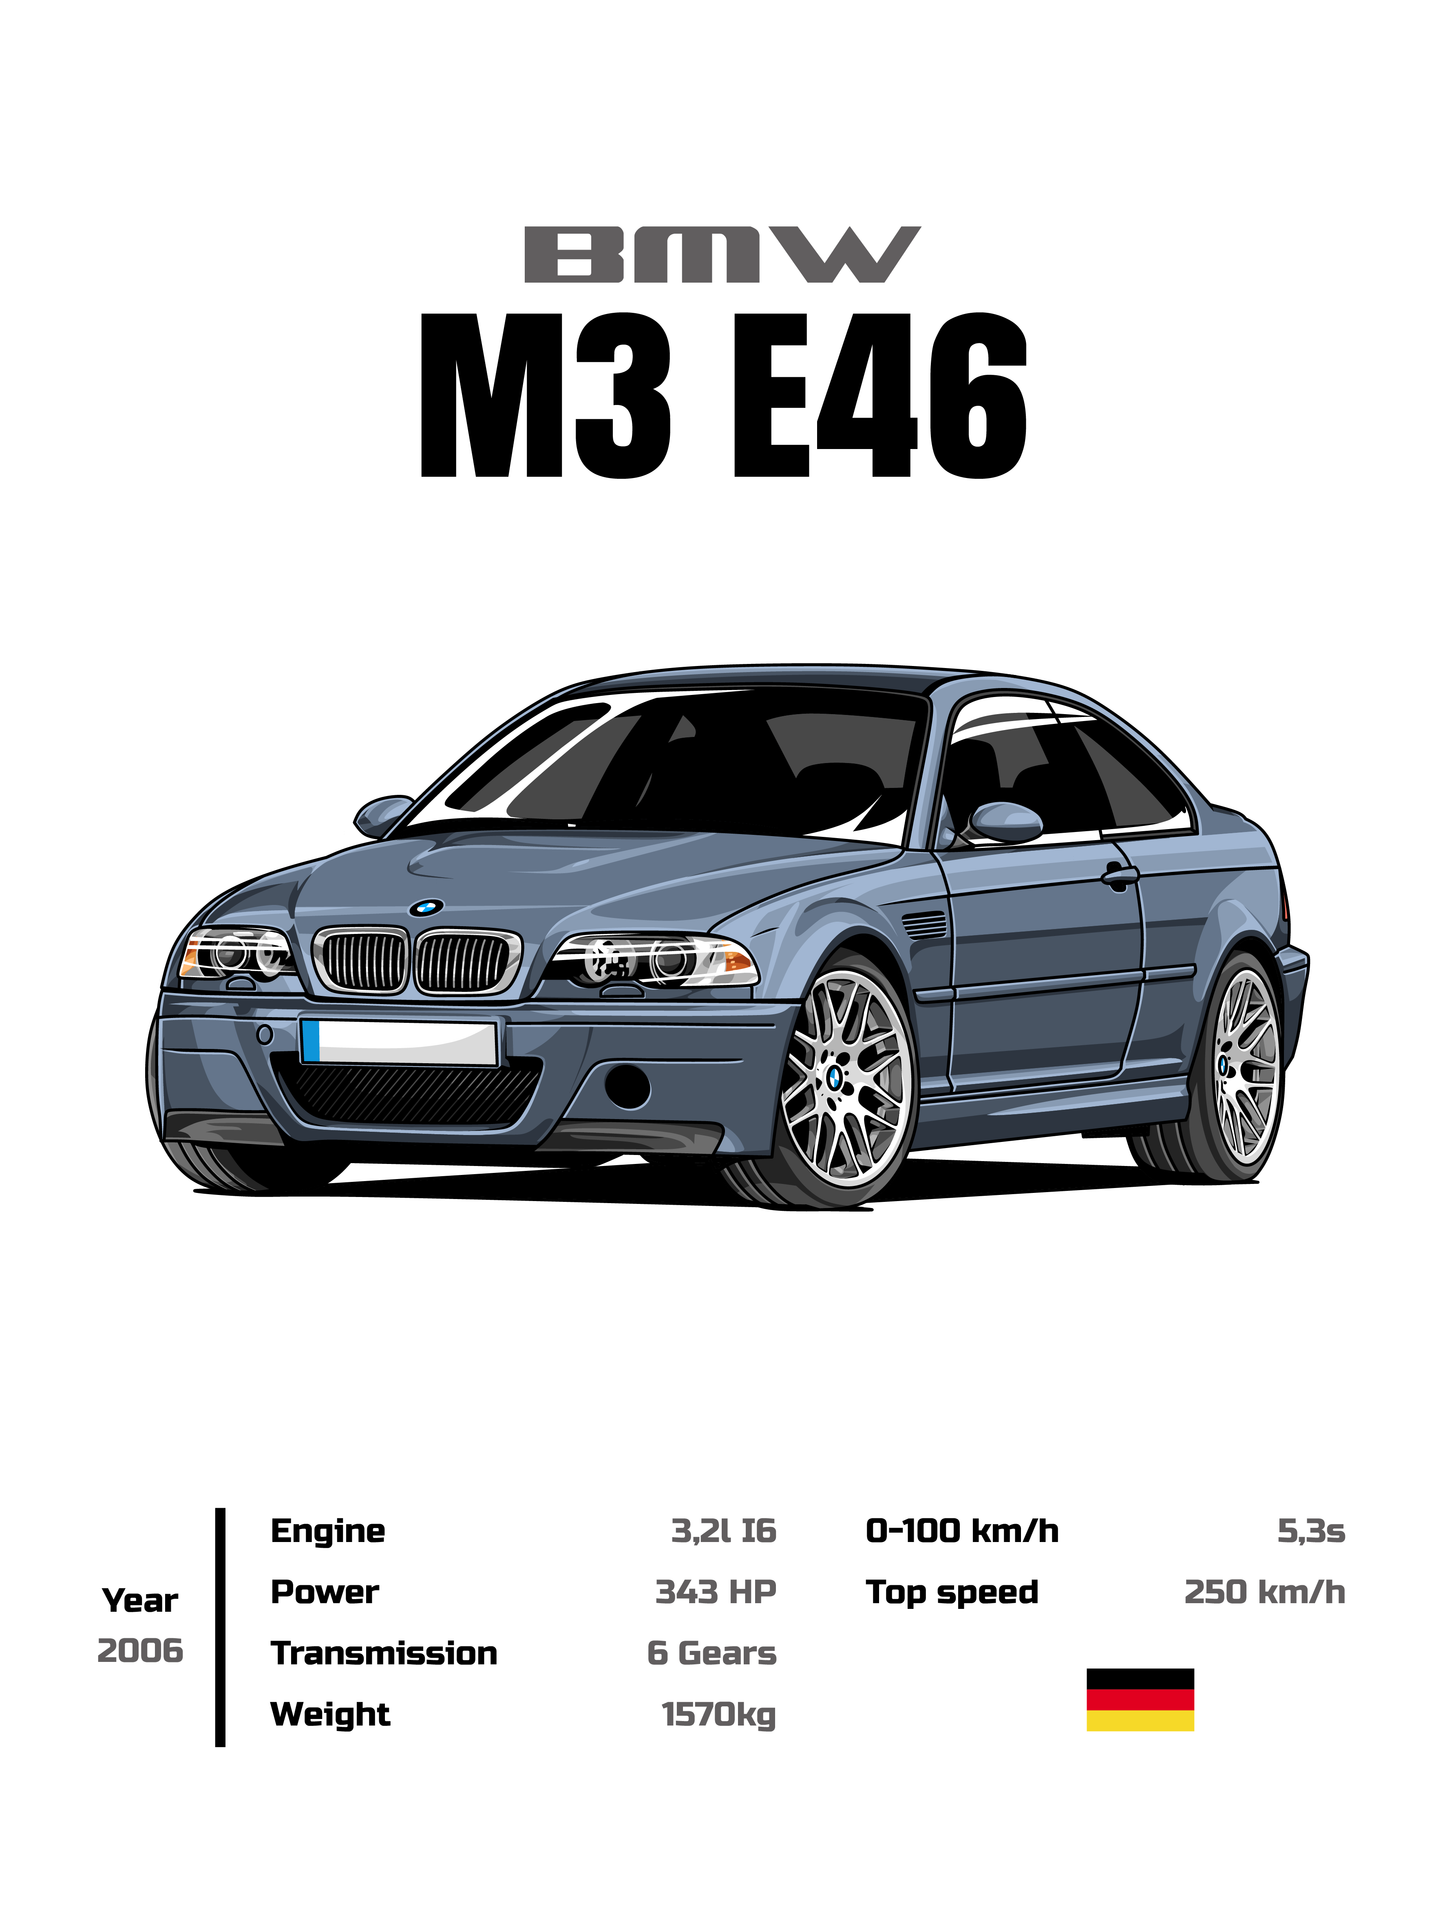 BMW M3 E46 Cars Stats Poster